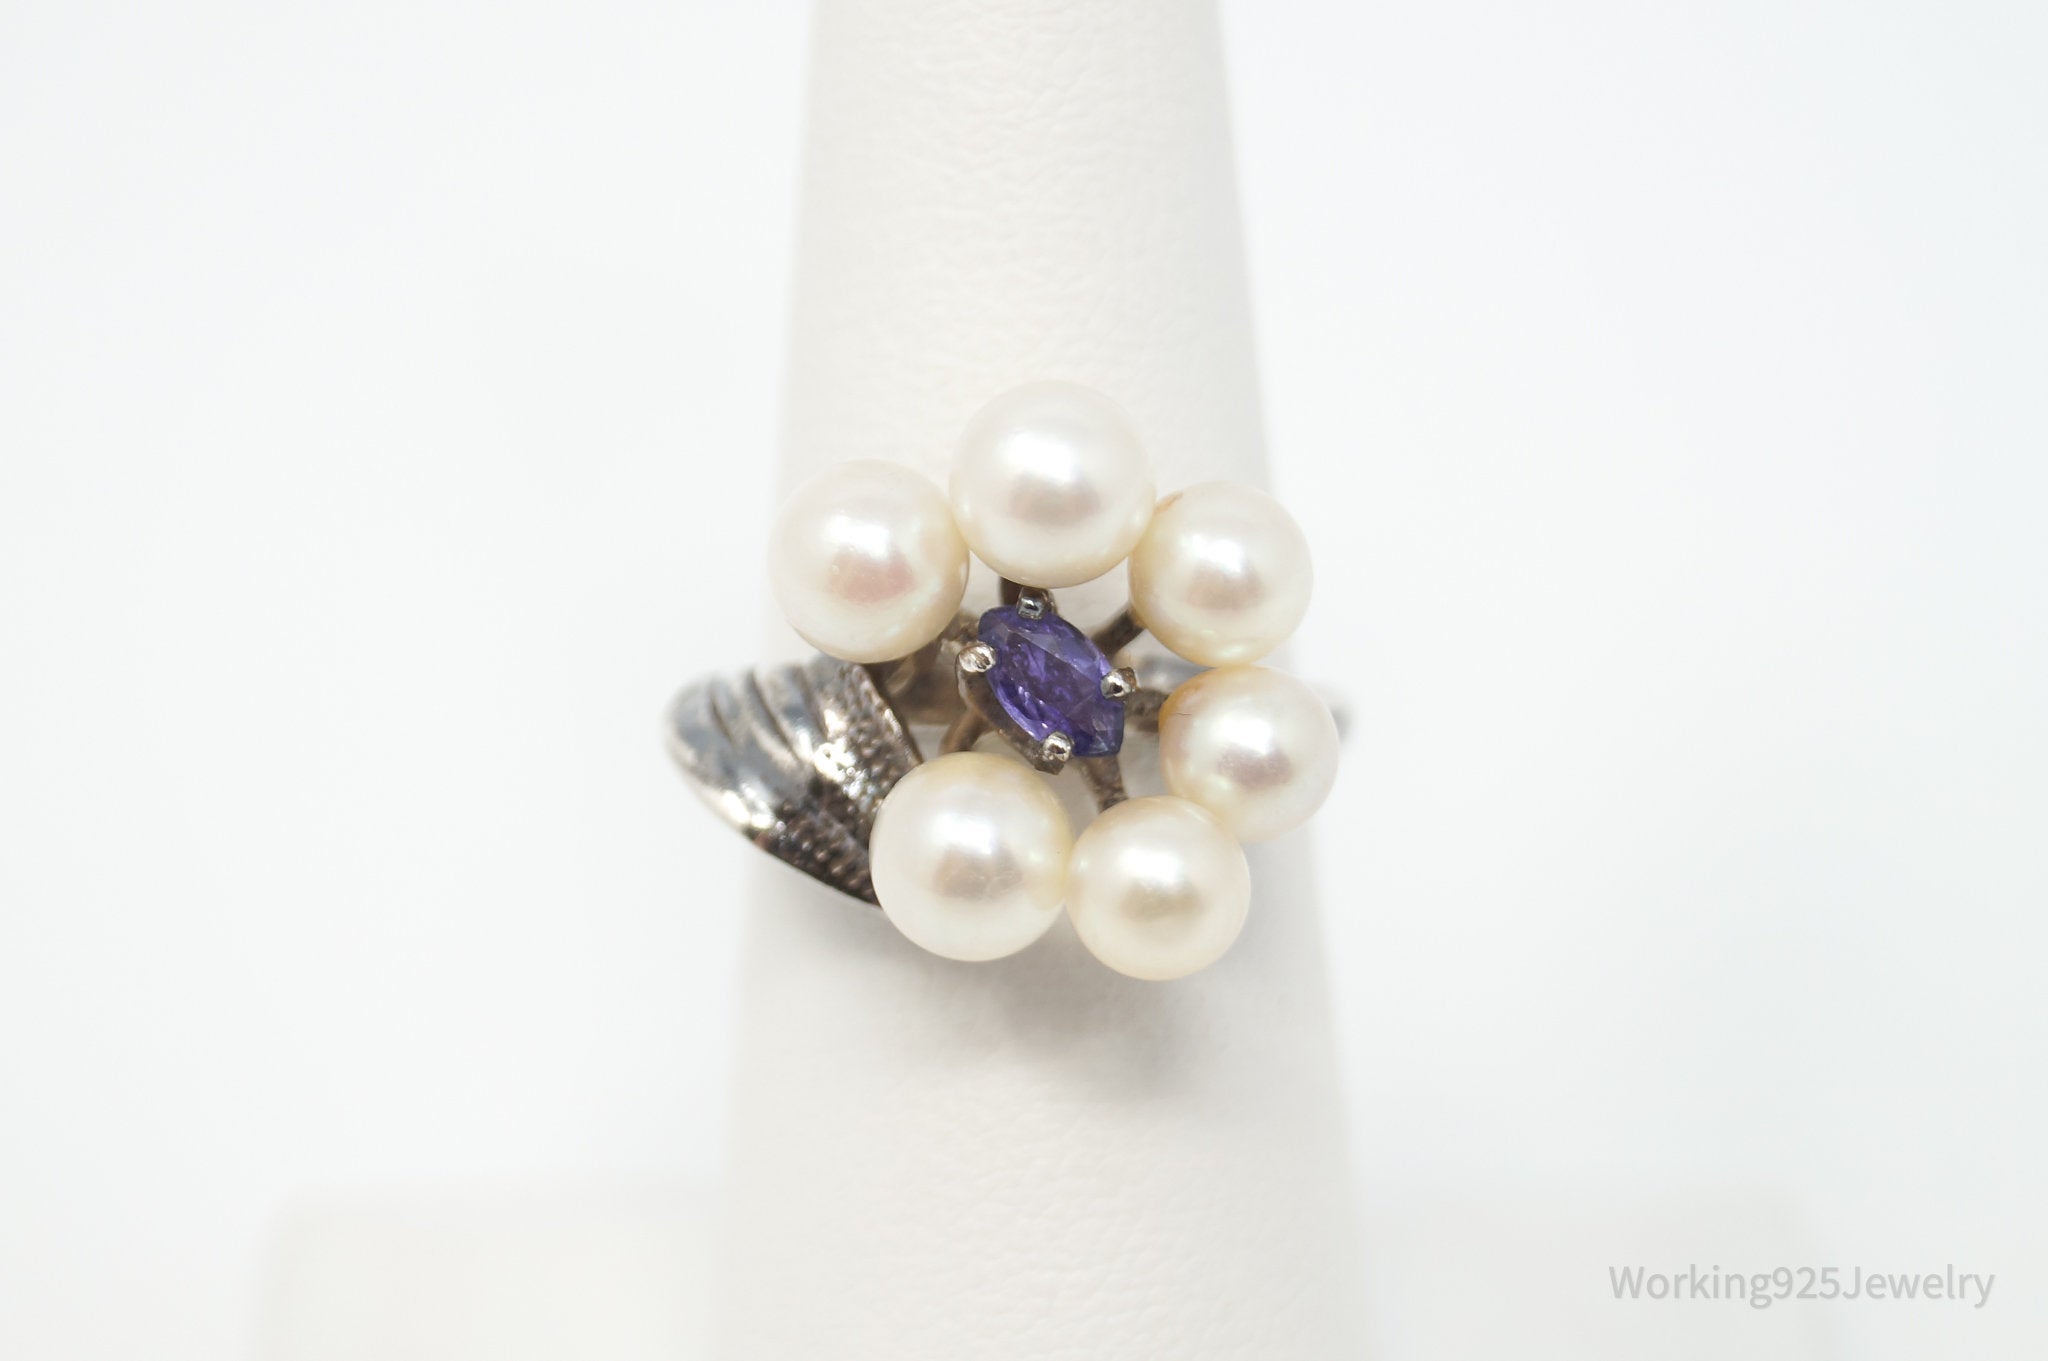 Antique Amethyst Pearl Sterling Silver Ring - Sz 6.25